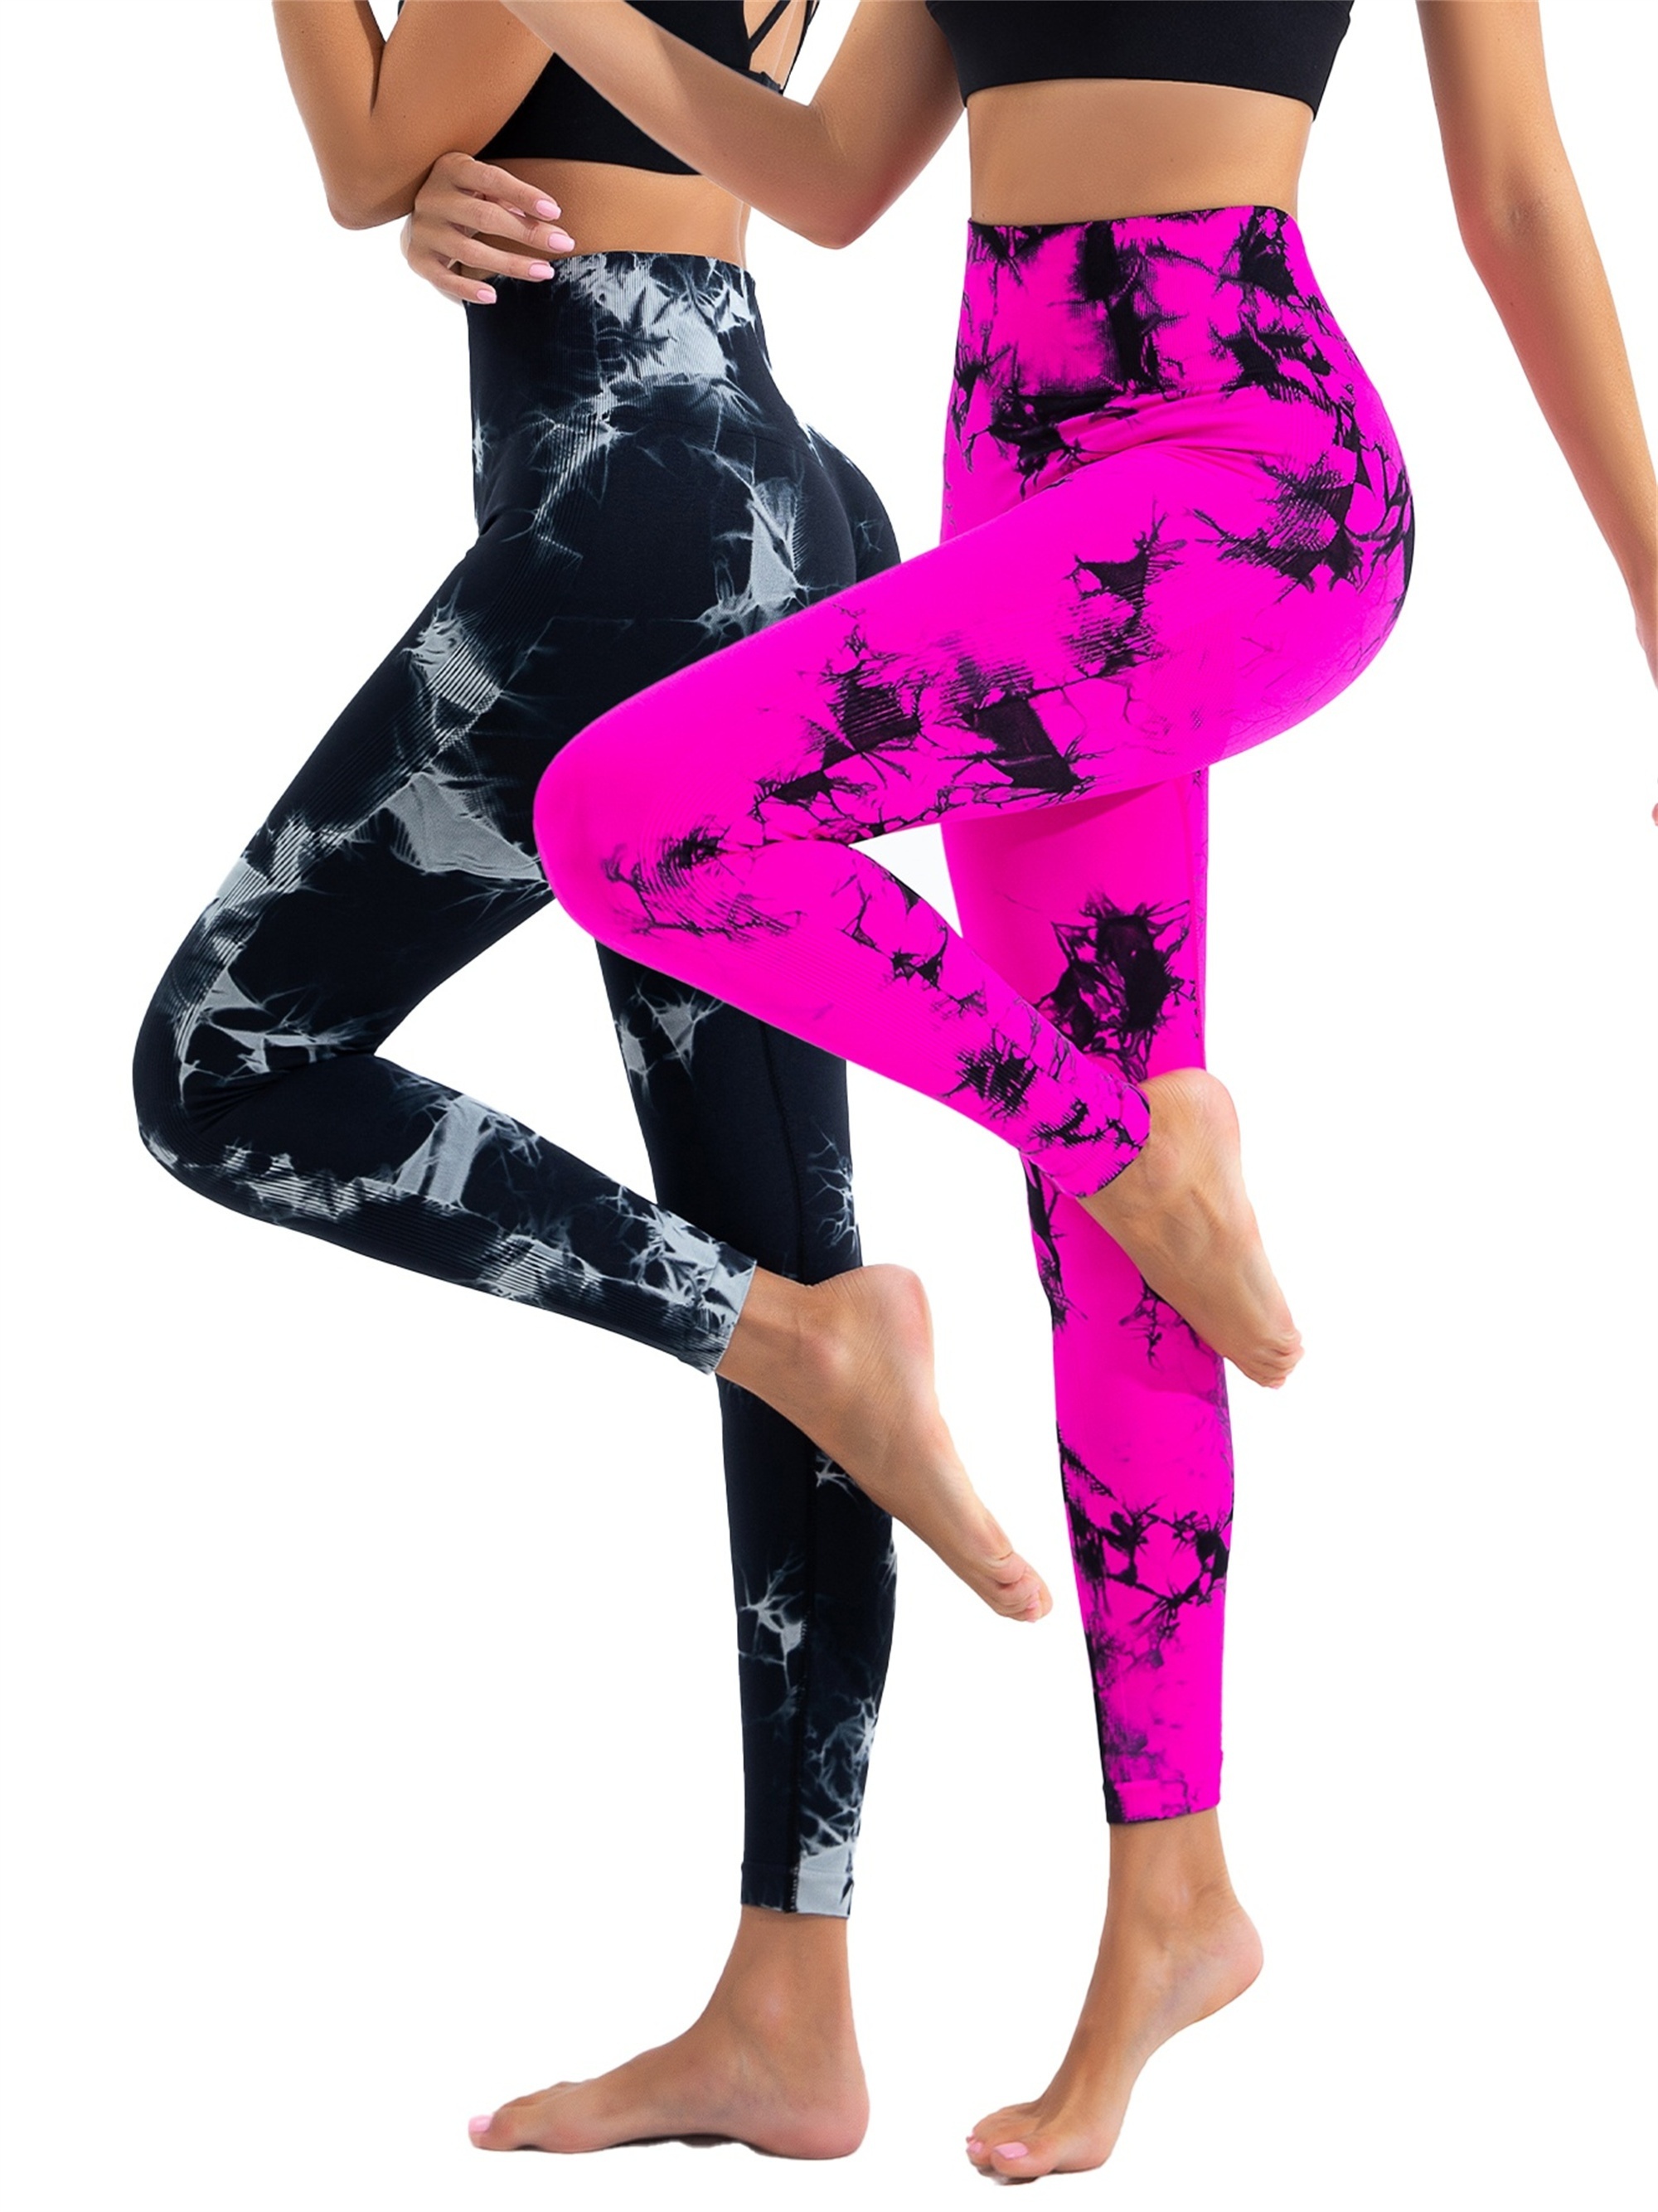 Booker Workout Leggings For Women Seamless Tie Dye And Tie Float